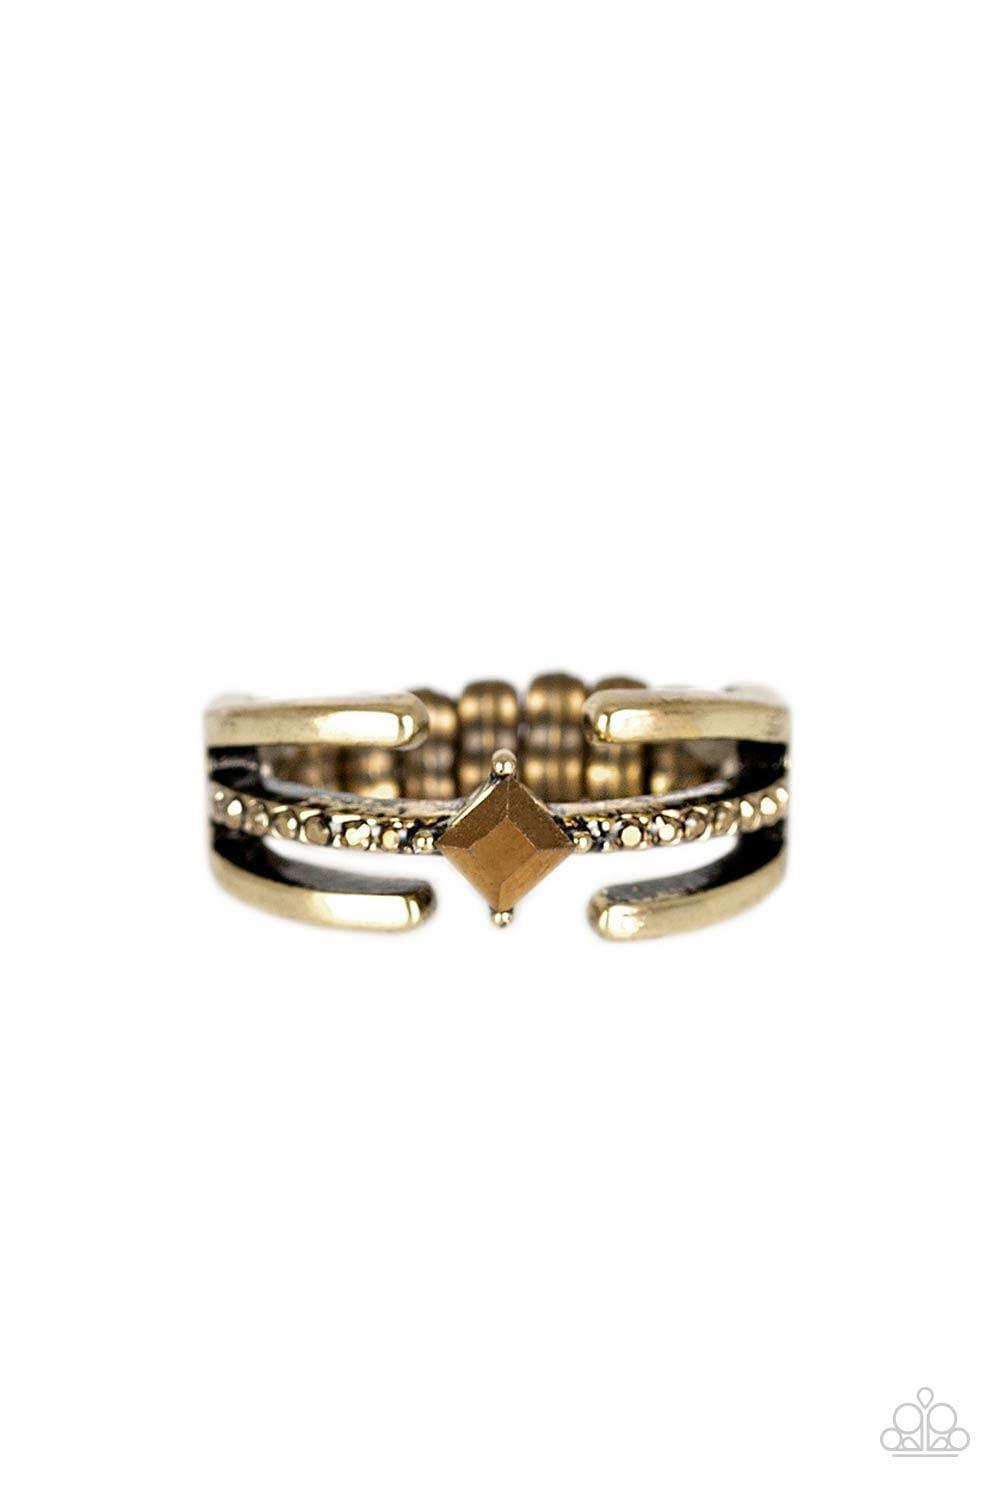 Paparazzi Accessories - City Center - Brass Ring - Bling by JessieK